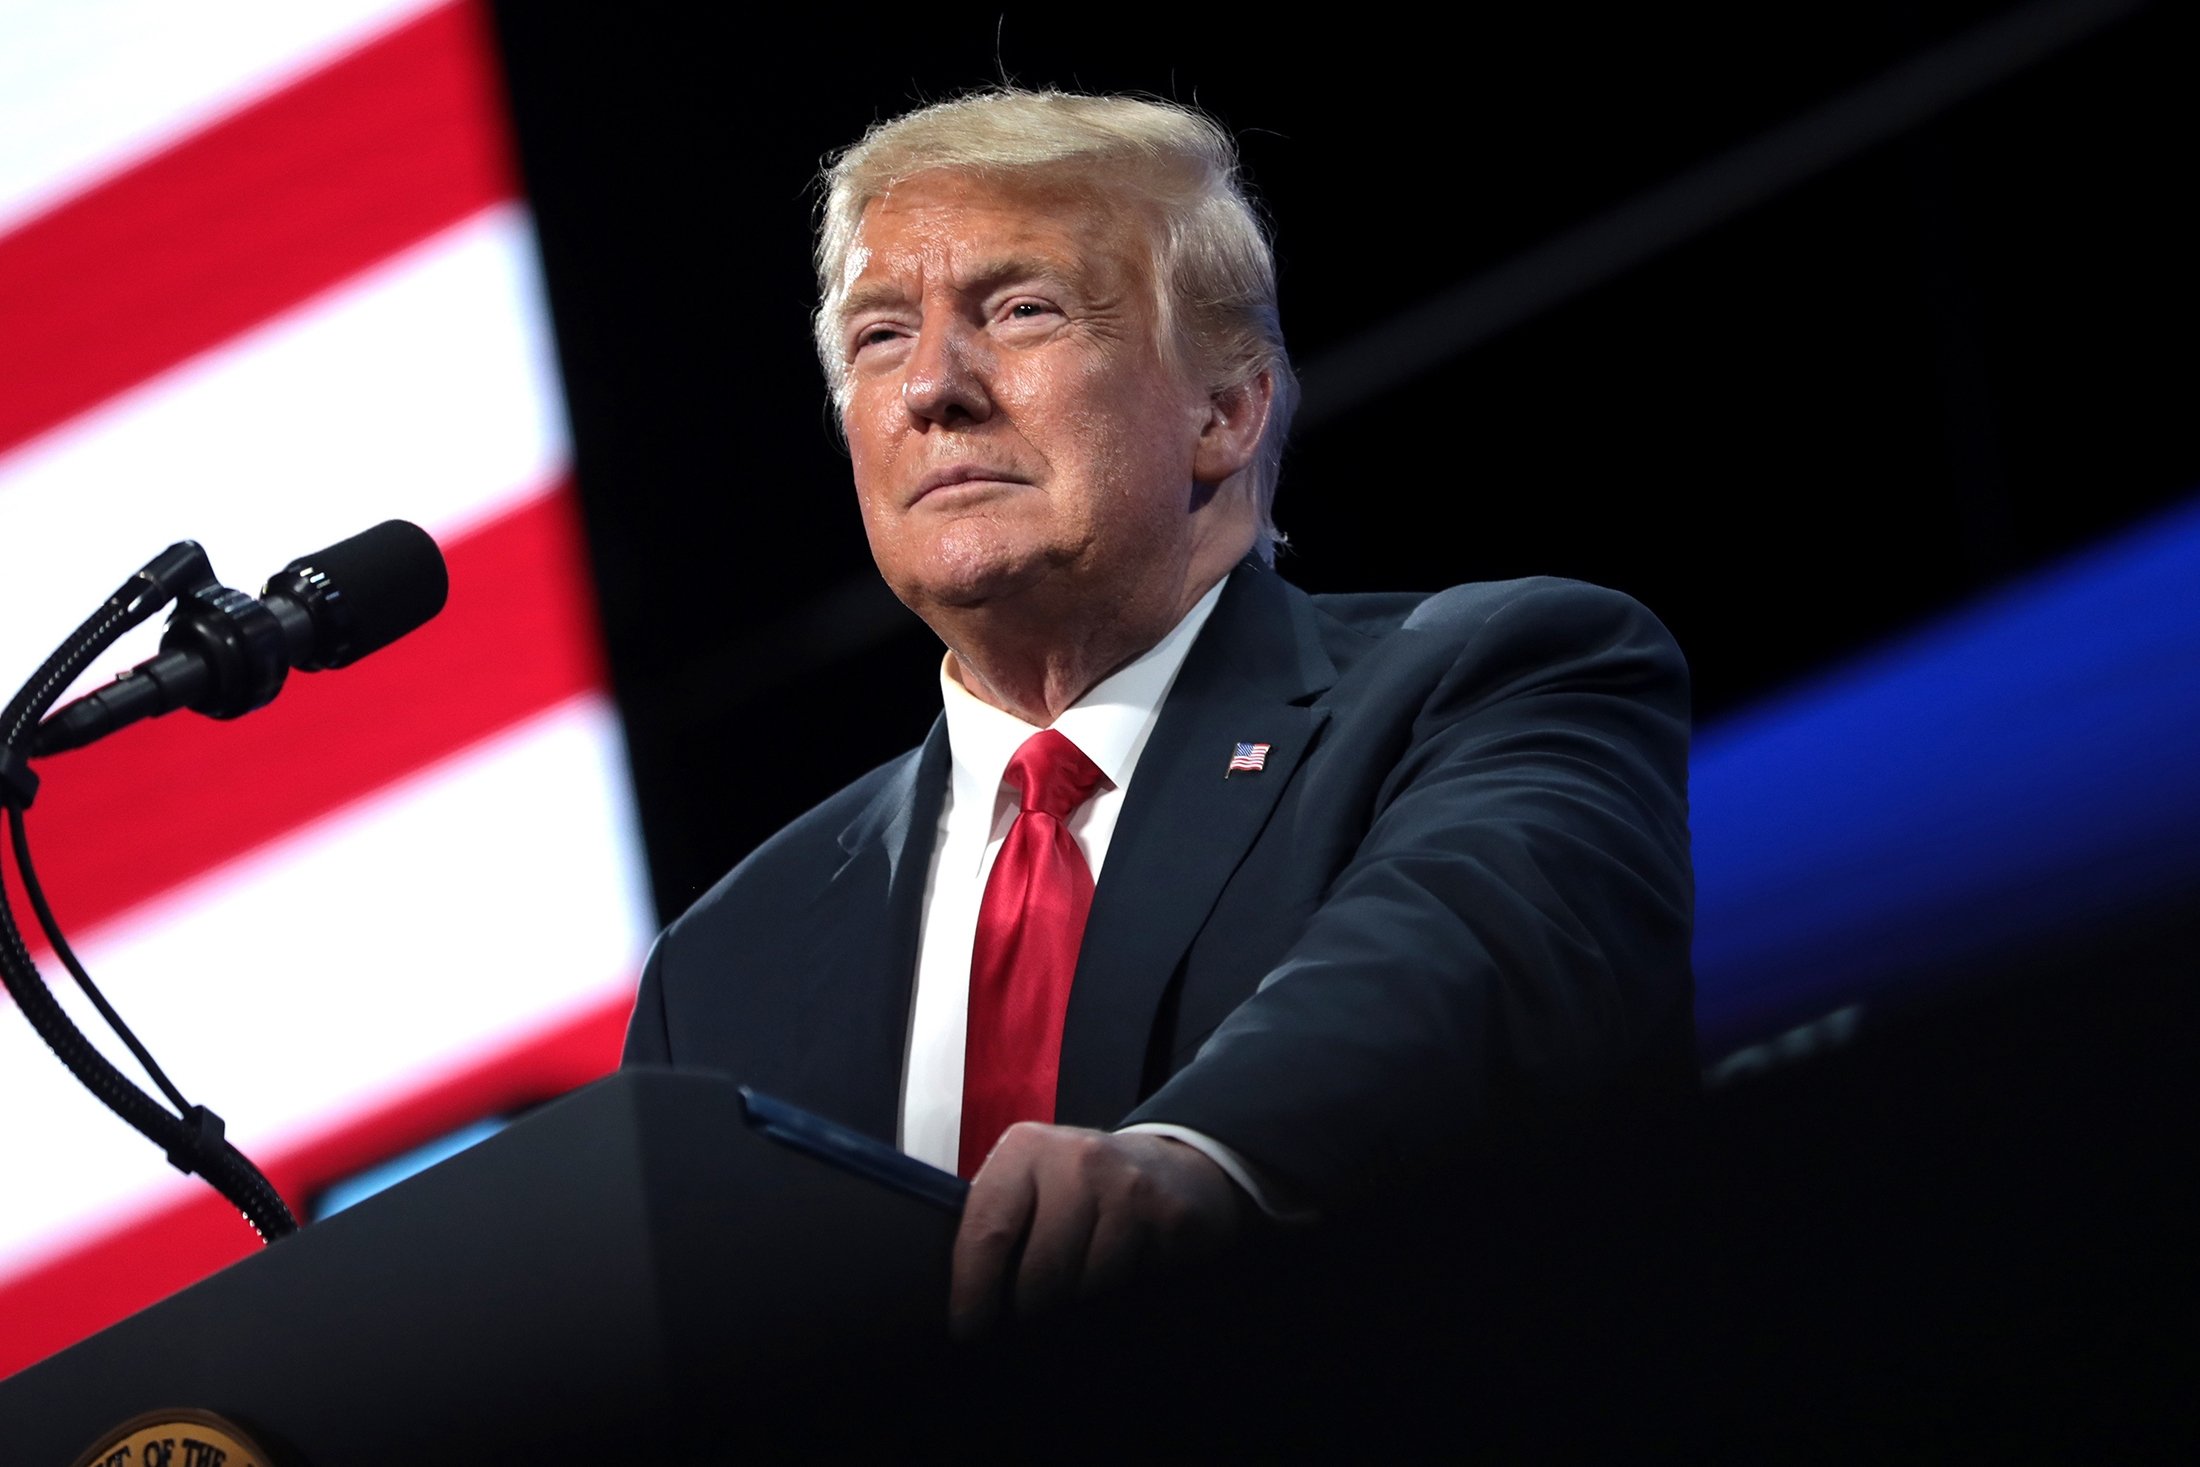 Former U.S. President Donald Trump speaks to a large crowd at an 'An Address to Young America' event hosted by Students for Trump and Turning Point Action, Phoenix, Arizona, U.S., June 23, 2020. (Shutterstock Photo)